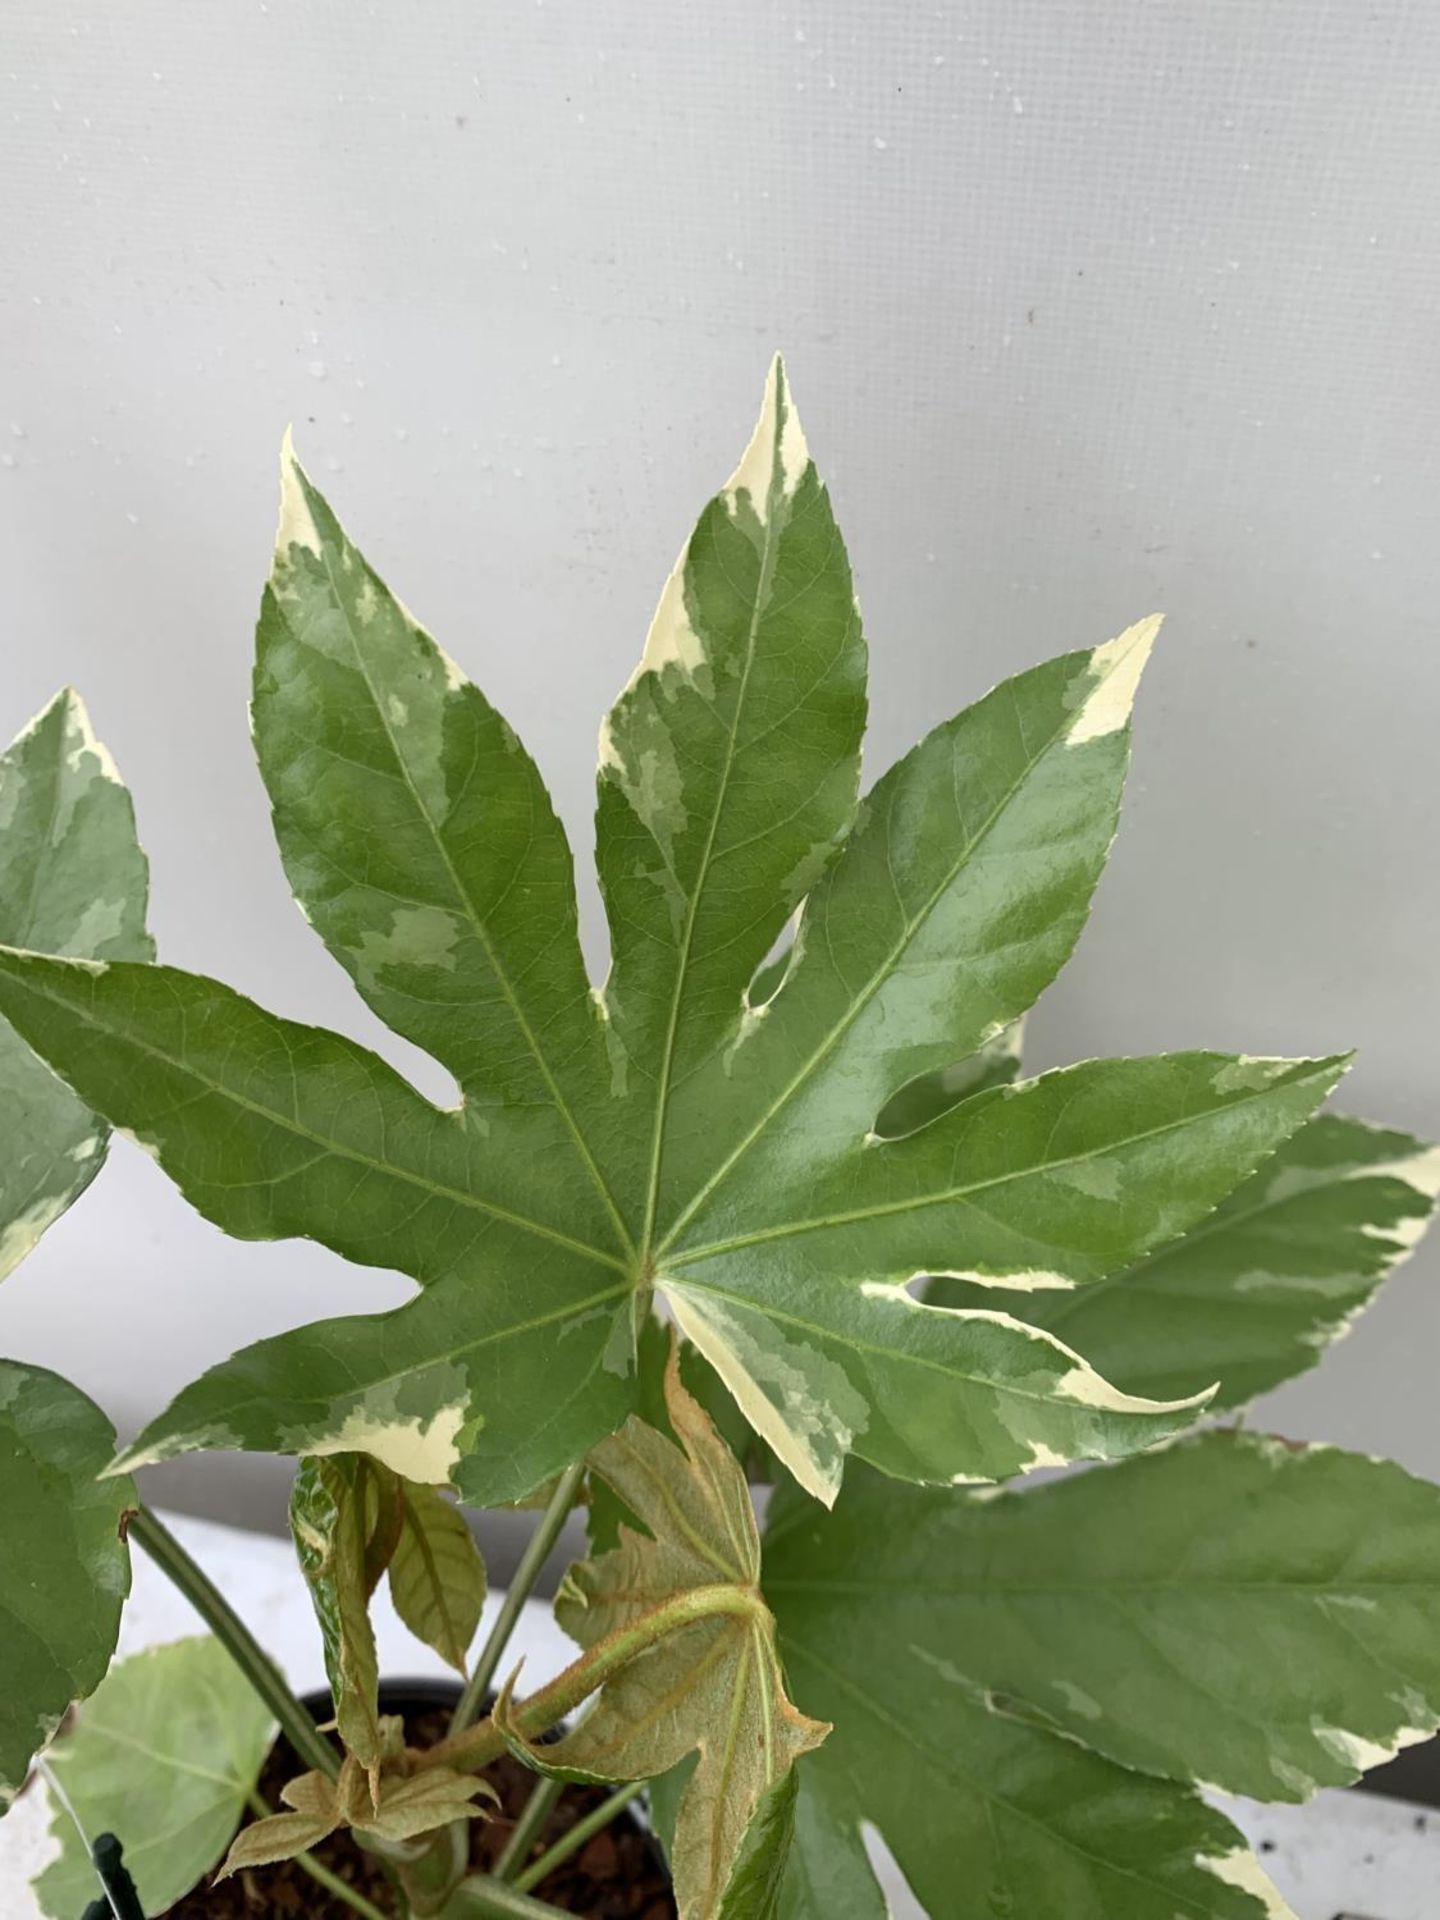 TWO FATSIA JAPONICA VARIEGATA AND FATSIA POLYCARPA 'GREEN FINGERS' IN 2 LTR POTS 50CM TALL PLUS - Image 16 of 16